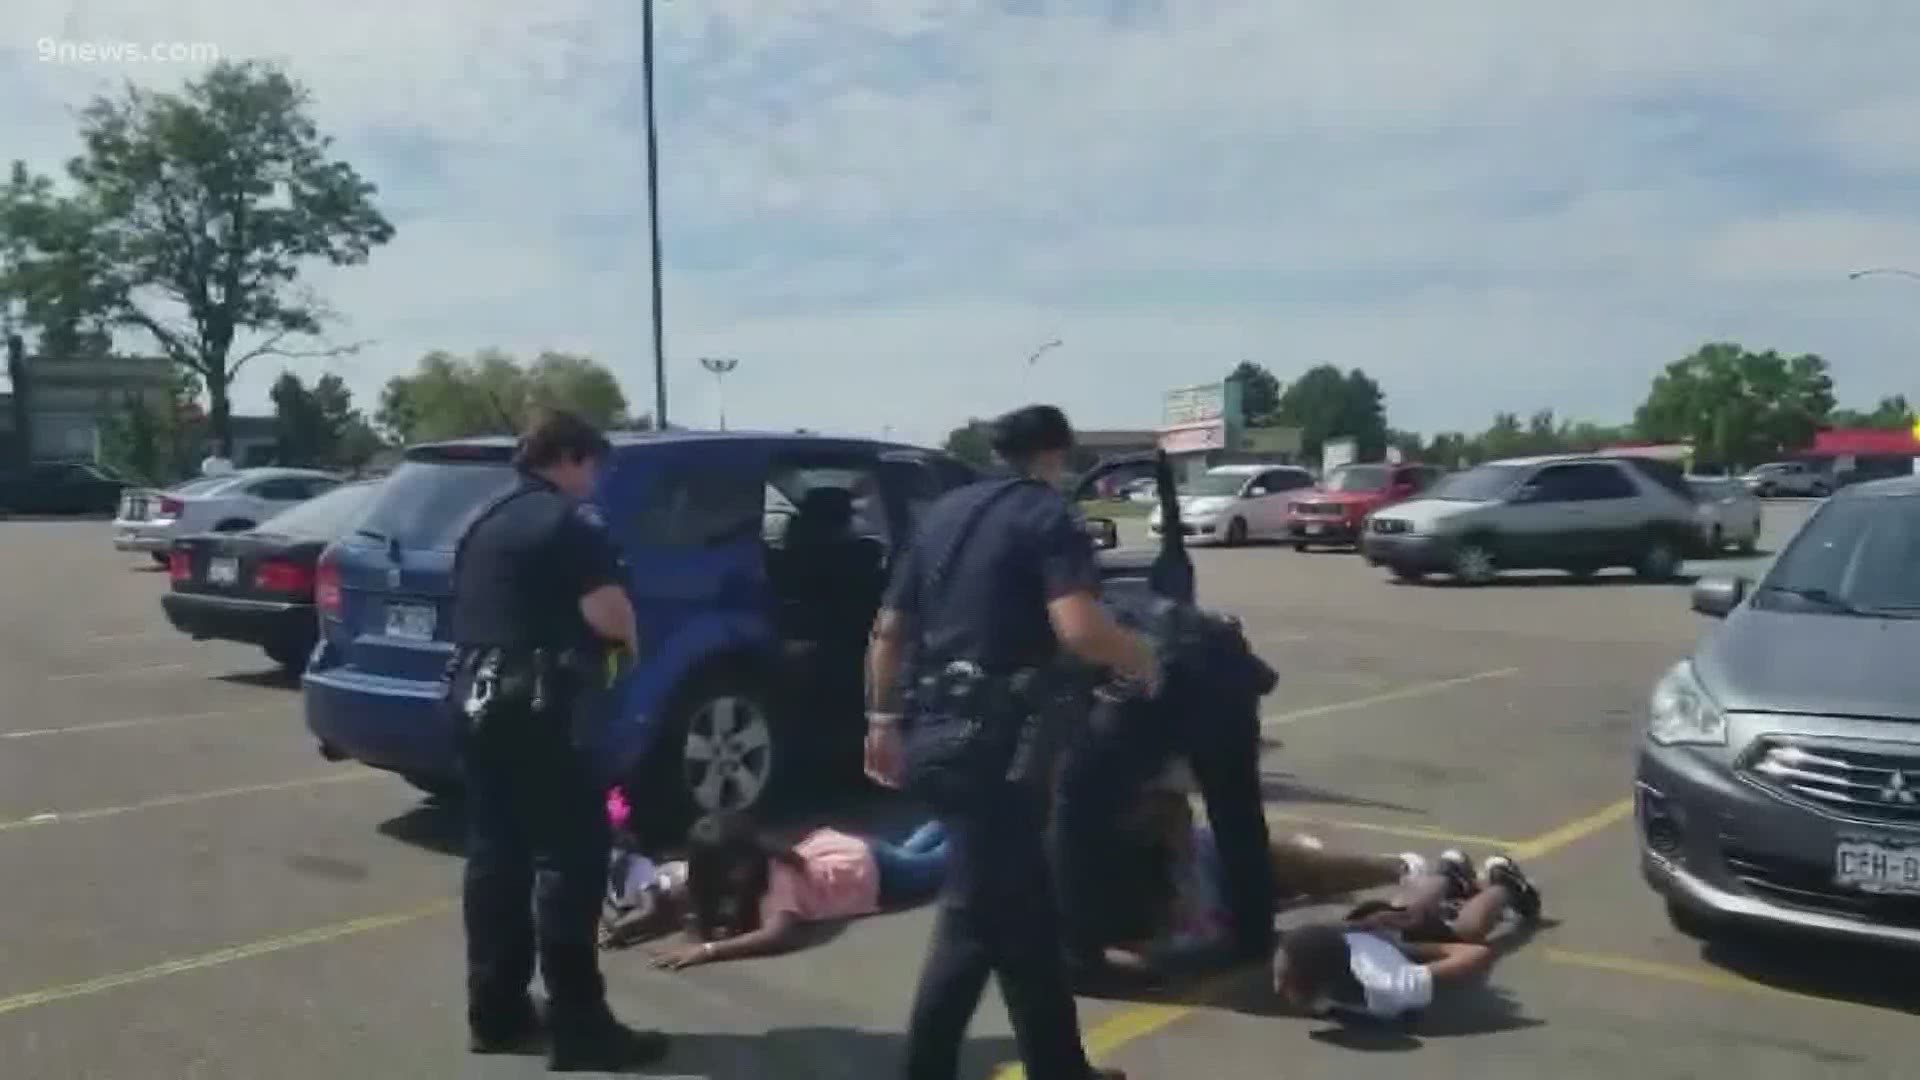 Officers detained a driver and four children, ages 6-17, inside a vehicle that was mistakenly identified as stolen, APD said.